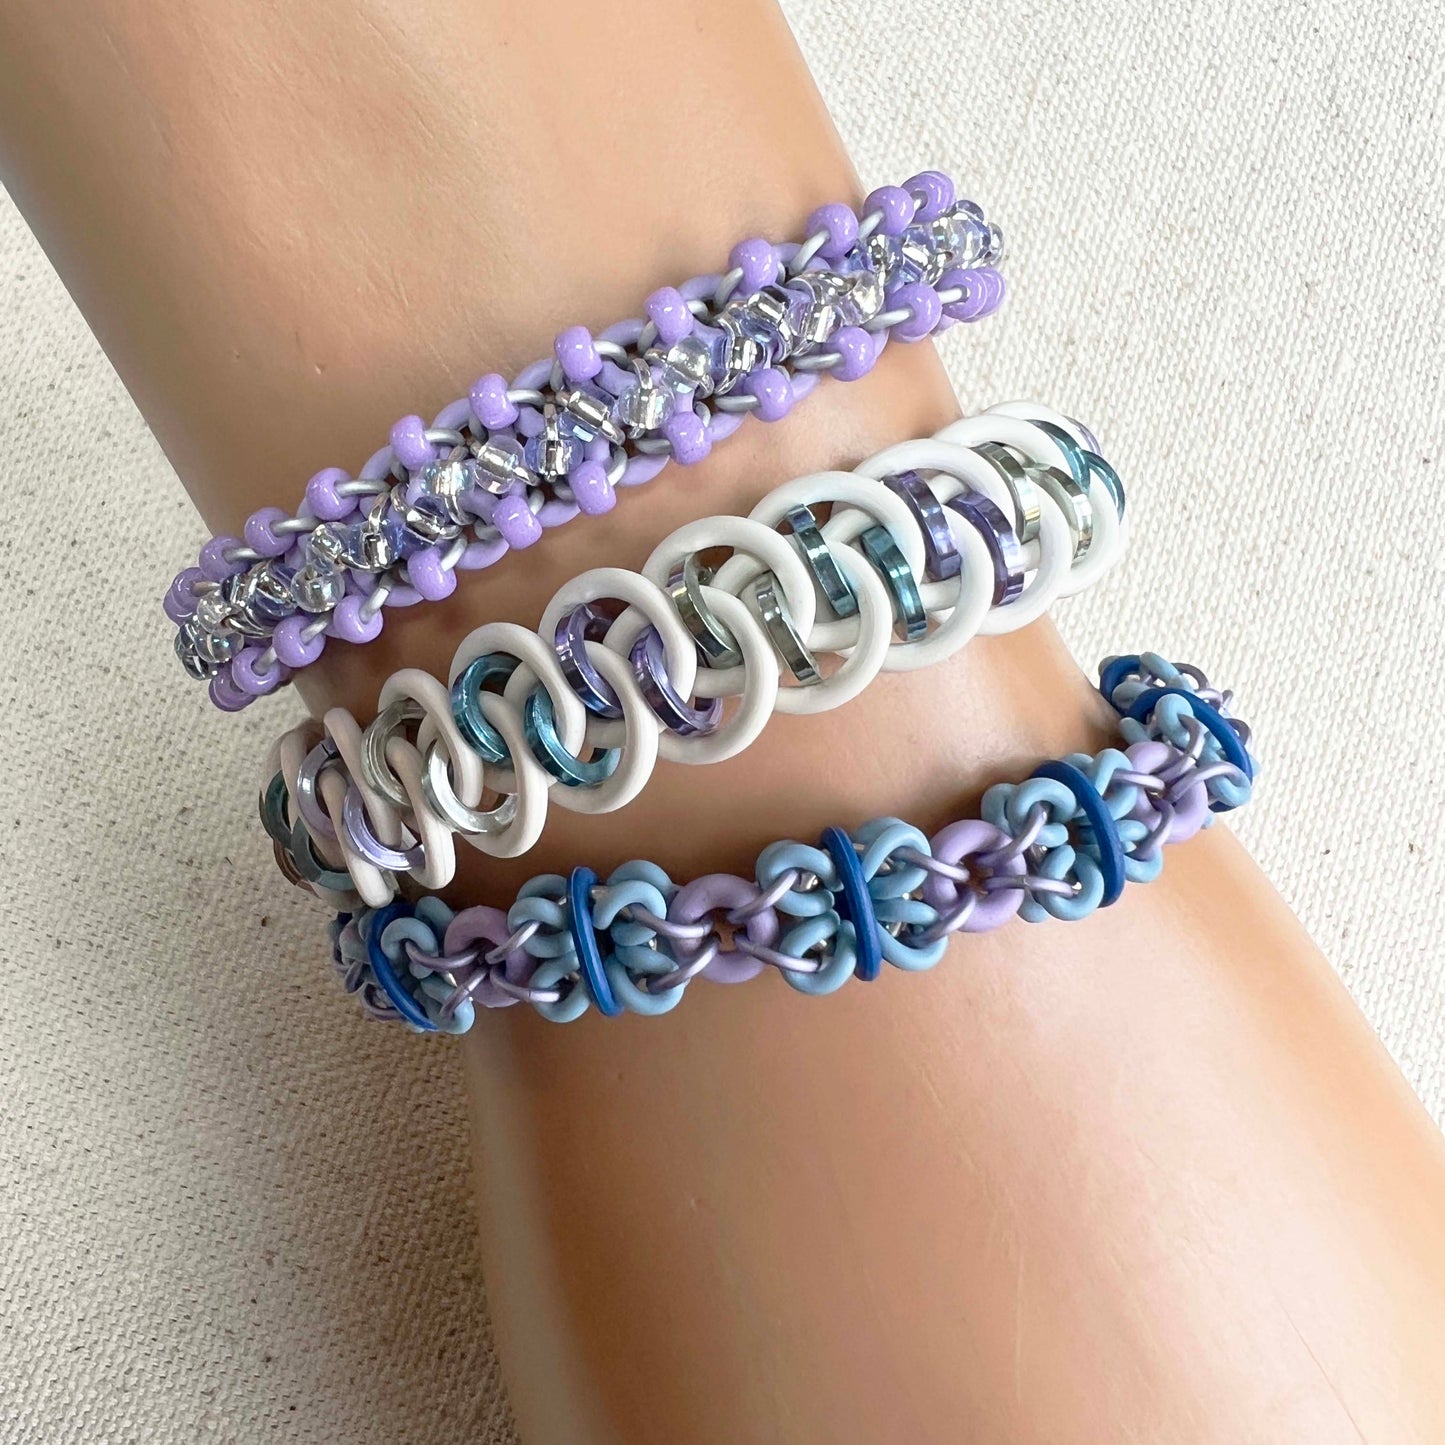 Dimensional Butterfly Stretch Bracelet kit with FREE video - Blue and Purple